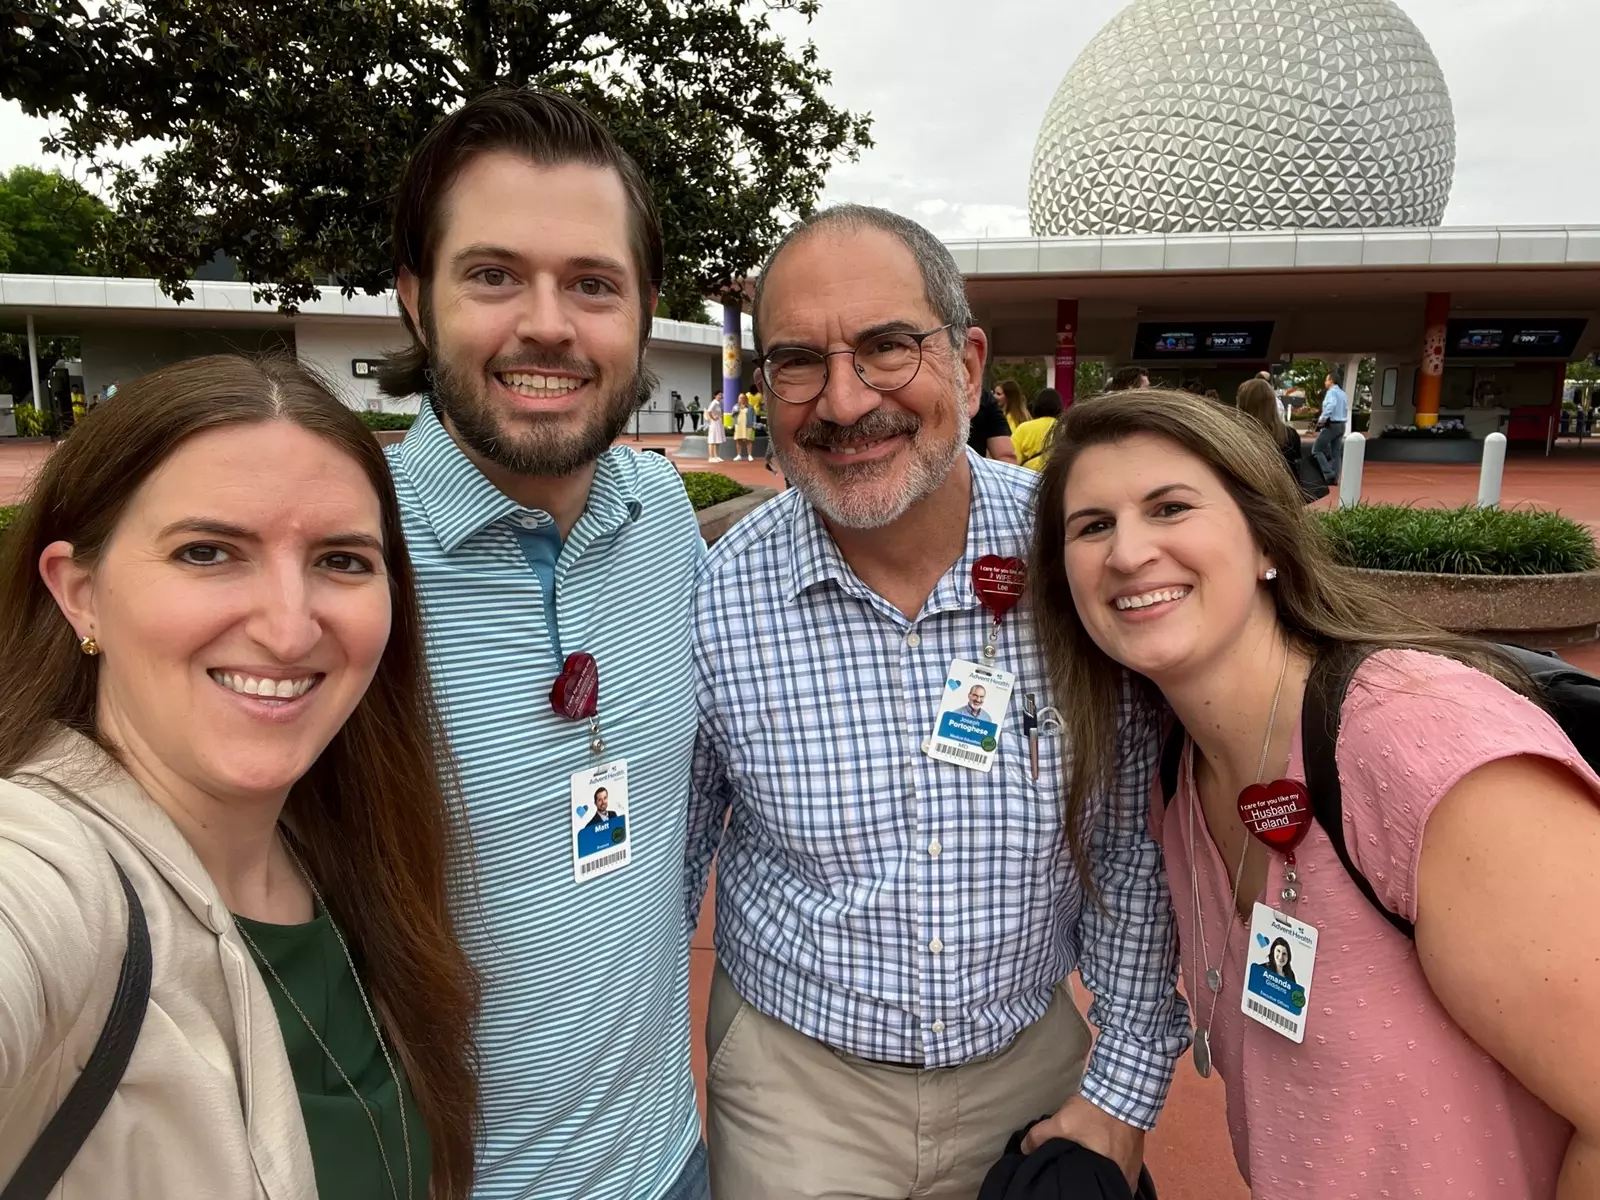 Members of the Portoghese family enjoy a day at Epcot.